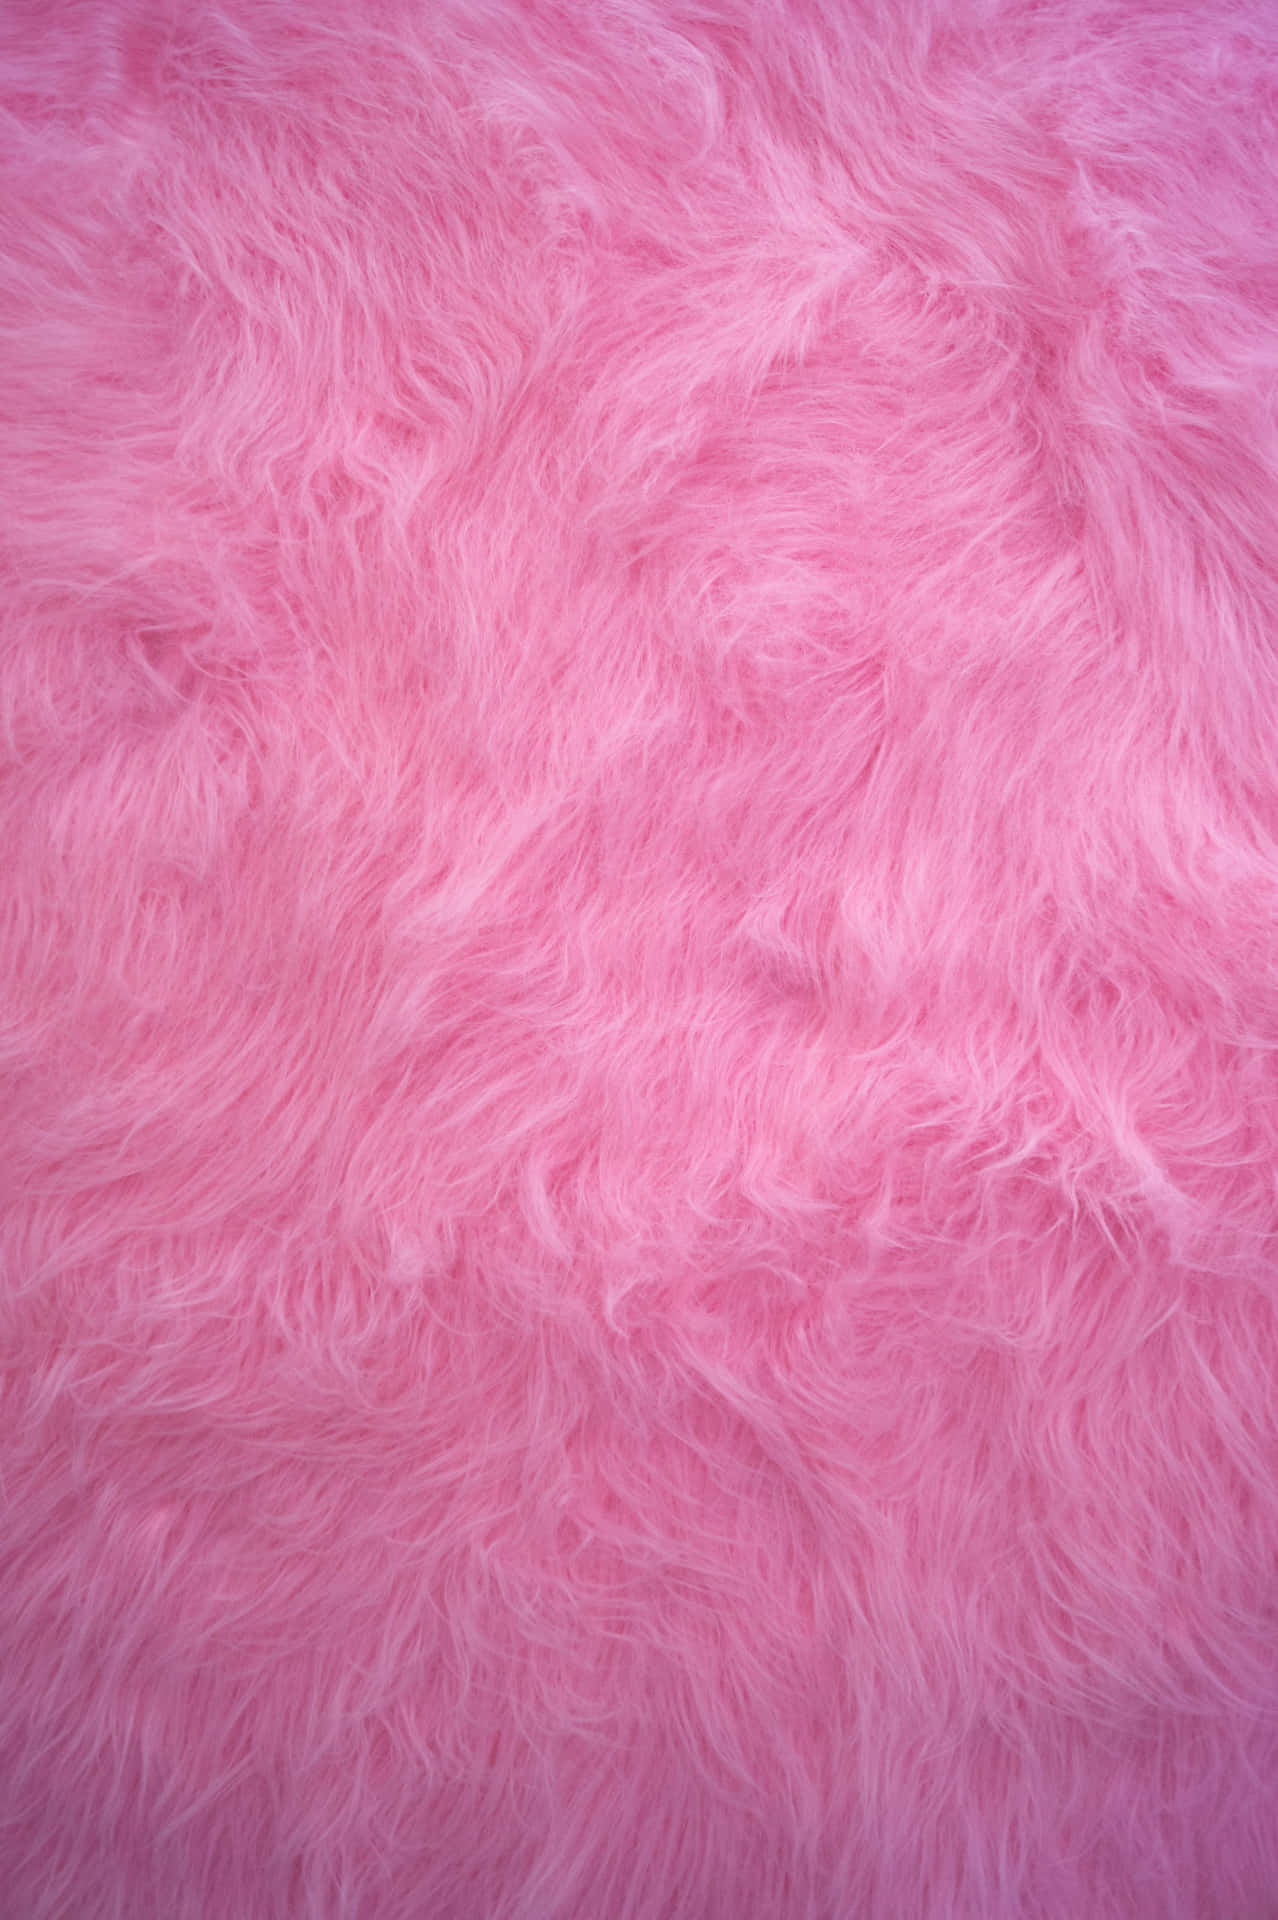 Pink Furry Background For Your Desktop